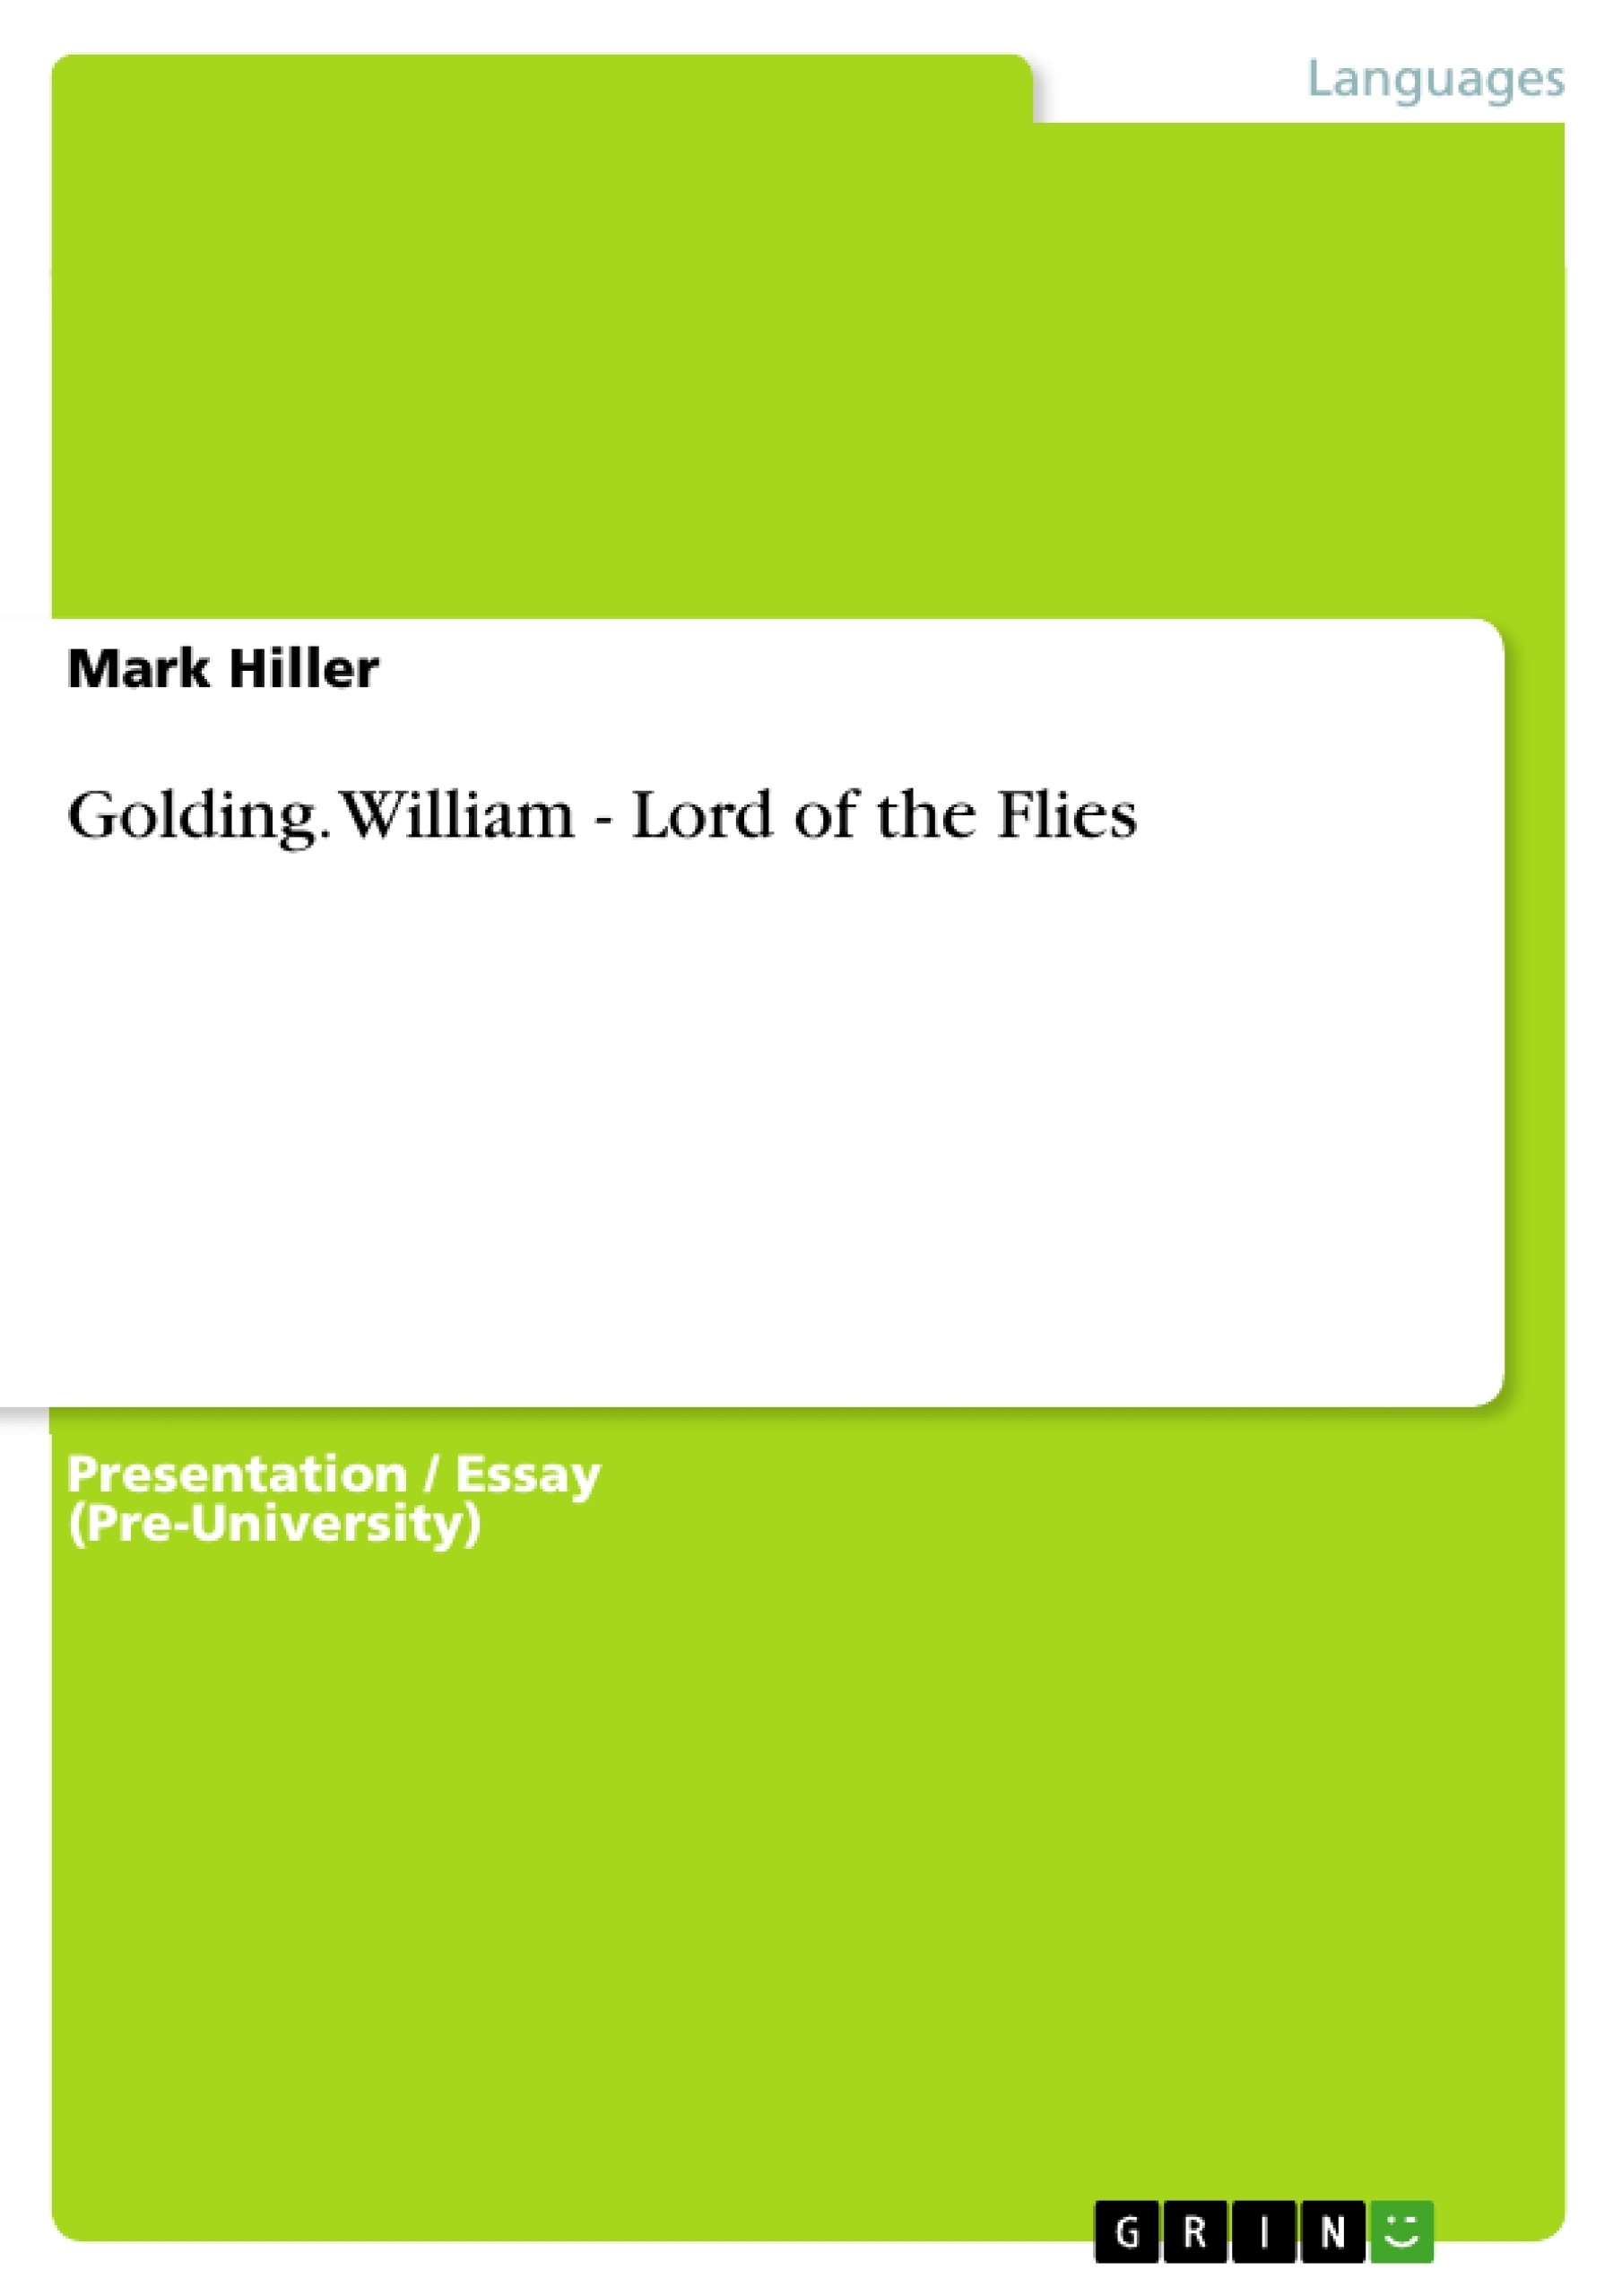 Título: Golding. William - Lord of the Flies